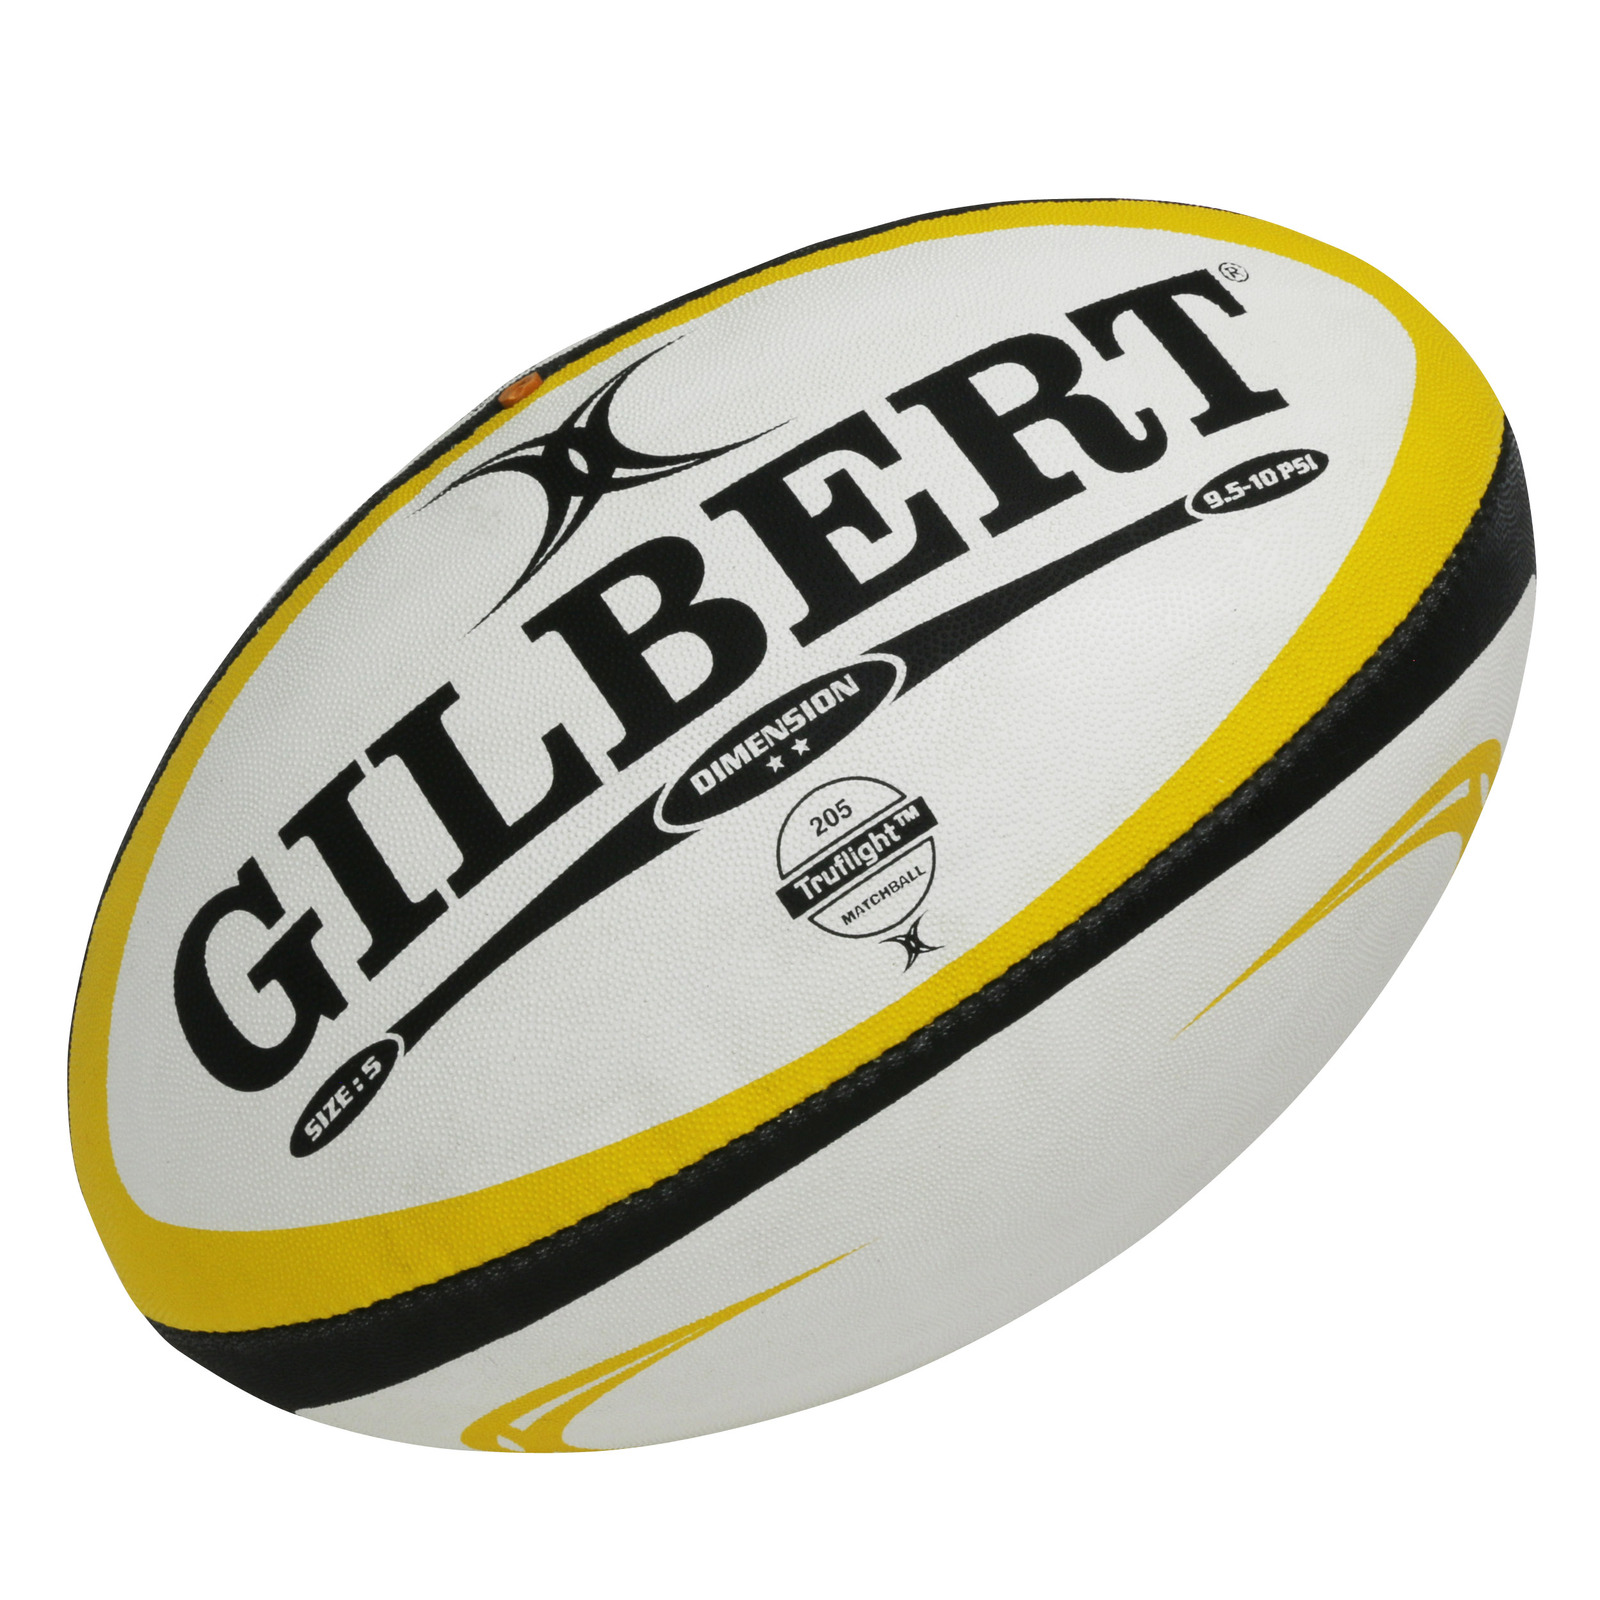 Gilbert Dimension Rugby Union Ball  For Sale BallSports 